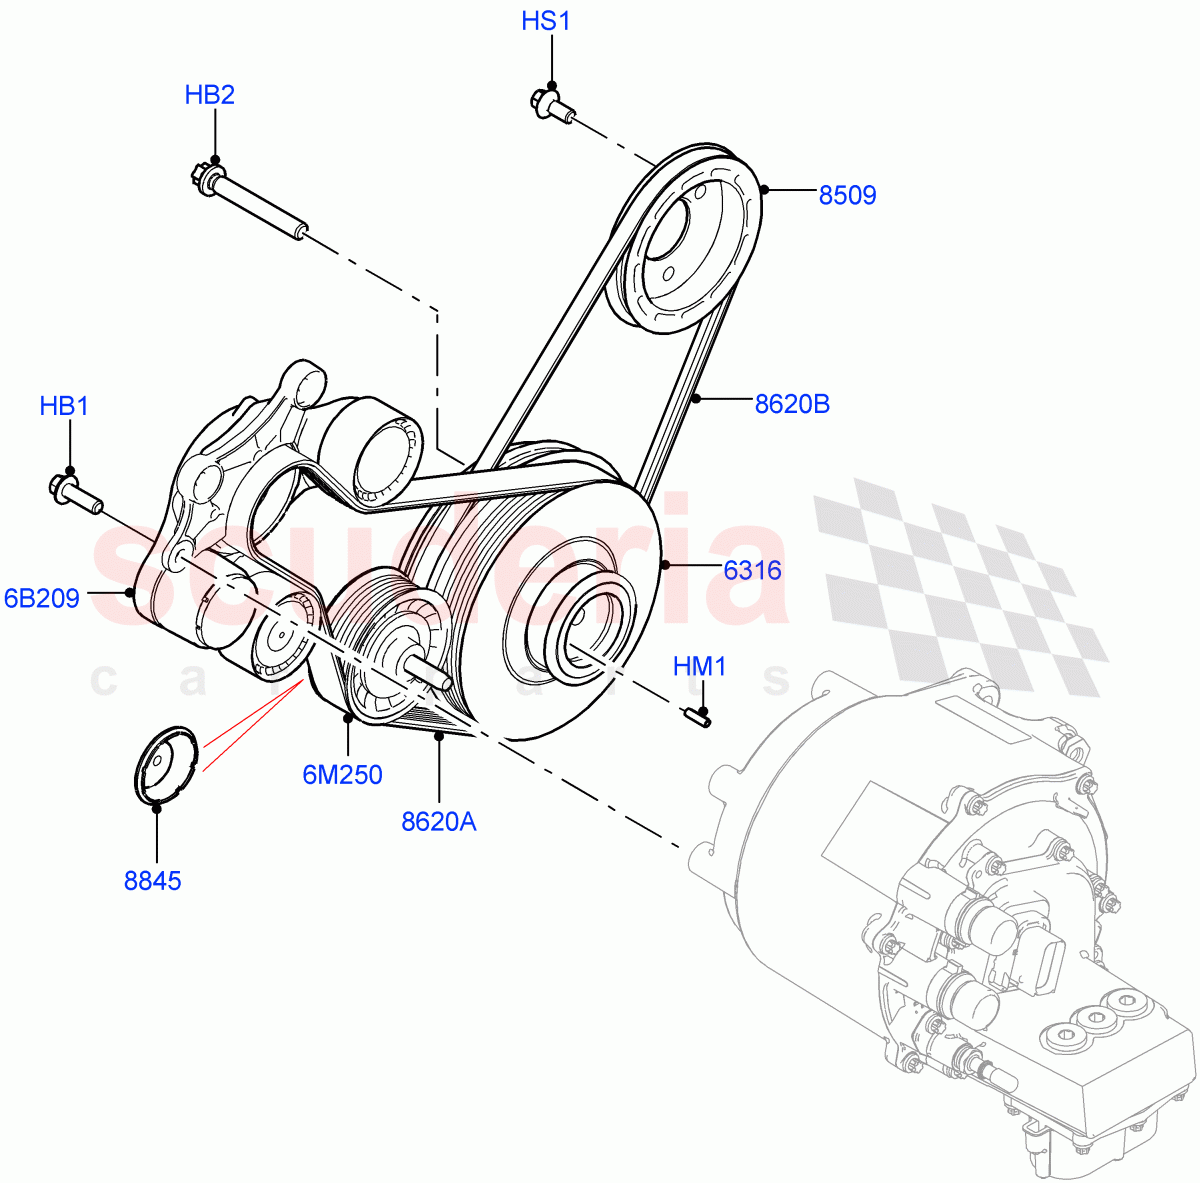 Pulleys And Drive Belts(1.5L AJ20P3 Petrol High PHEV,Halewood (UK))((V)FROMLH000001) of Land Rover Land Rover Range Rover Evoque (2019+) [1.5 I3 Turbo Petrol AJ20P3]